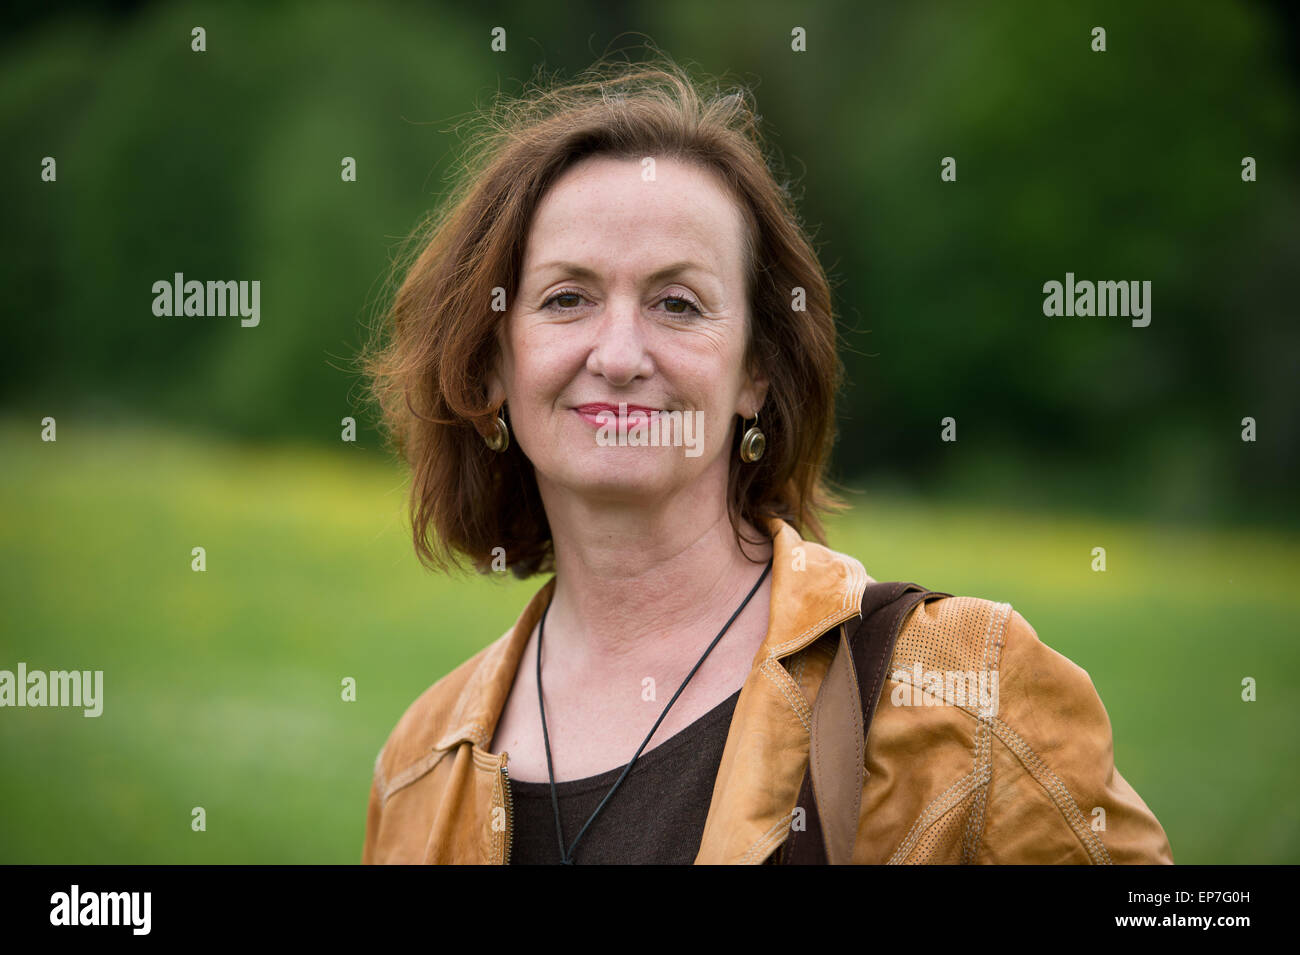 Muensingen, Germany. 14th May, 2015. Actress Irene Fischer poses in Muensingen, Germany, 14 May 2015. A celebratory linden tree was planted for the 30th birthday of the well known ARD series 'Lindenstrasse.' Photo: DANIEL NAUPOLD/dpa/Alamy Live News Stock Photo